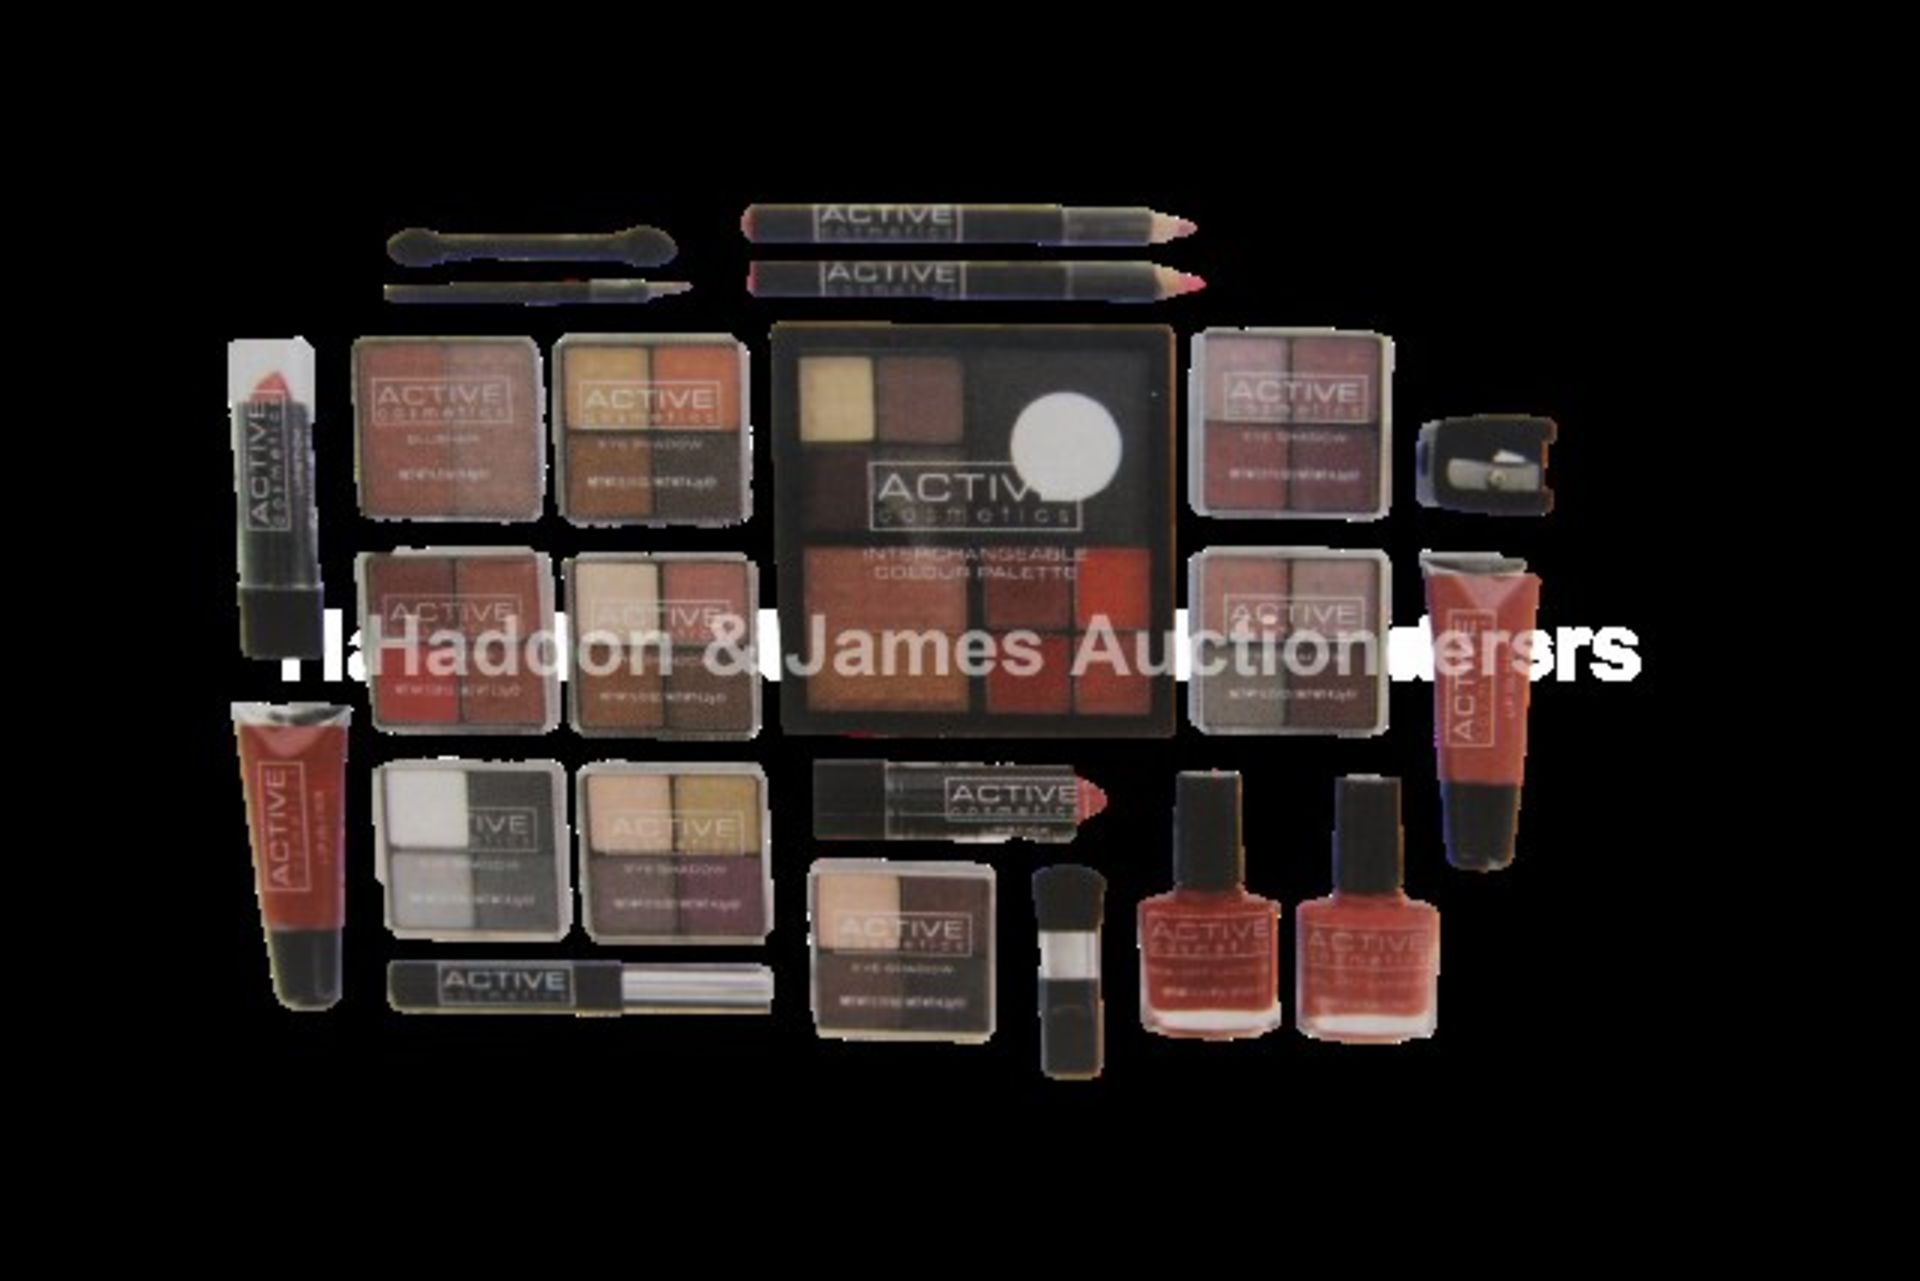 V Brand New Ex Lge Active Cosmetics set includes 23 items SRP £40